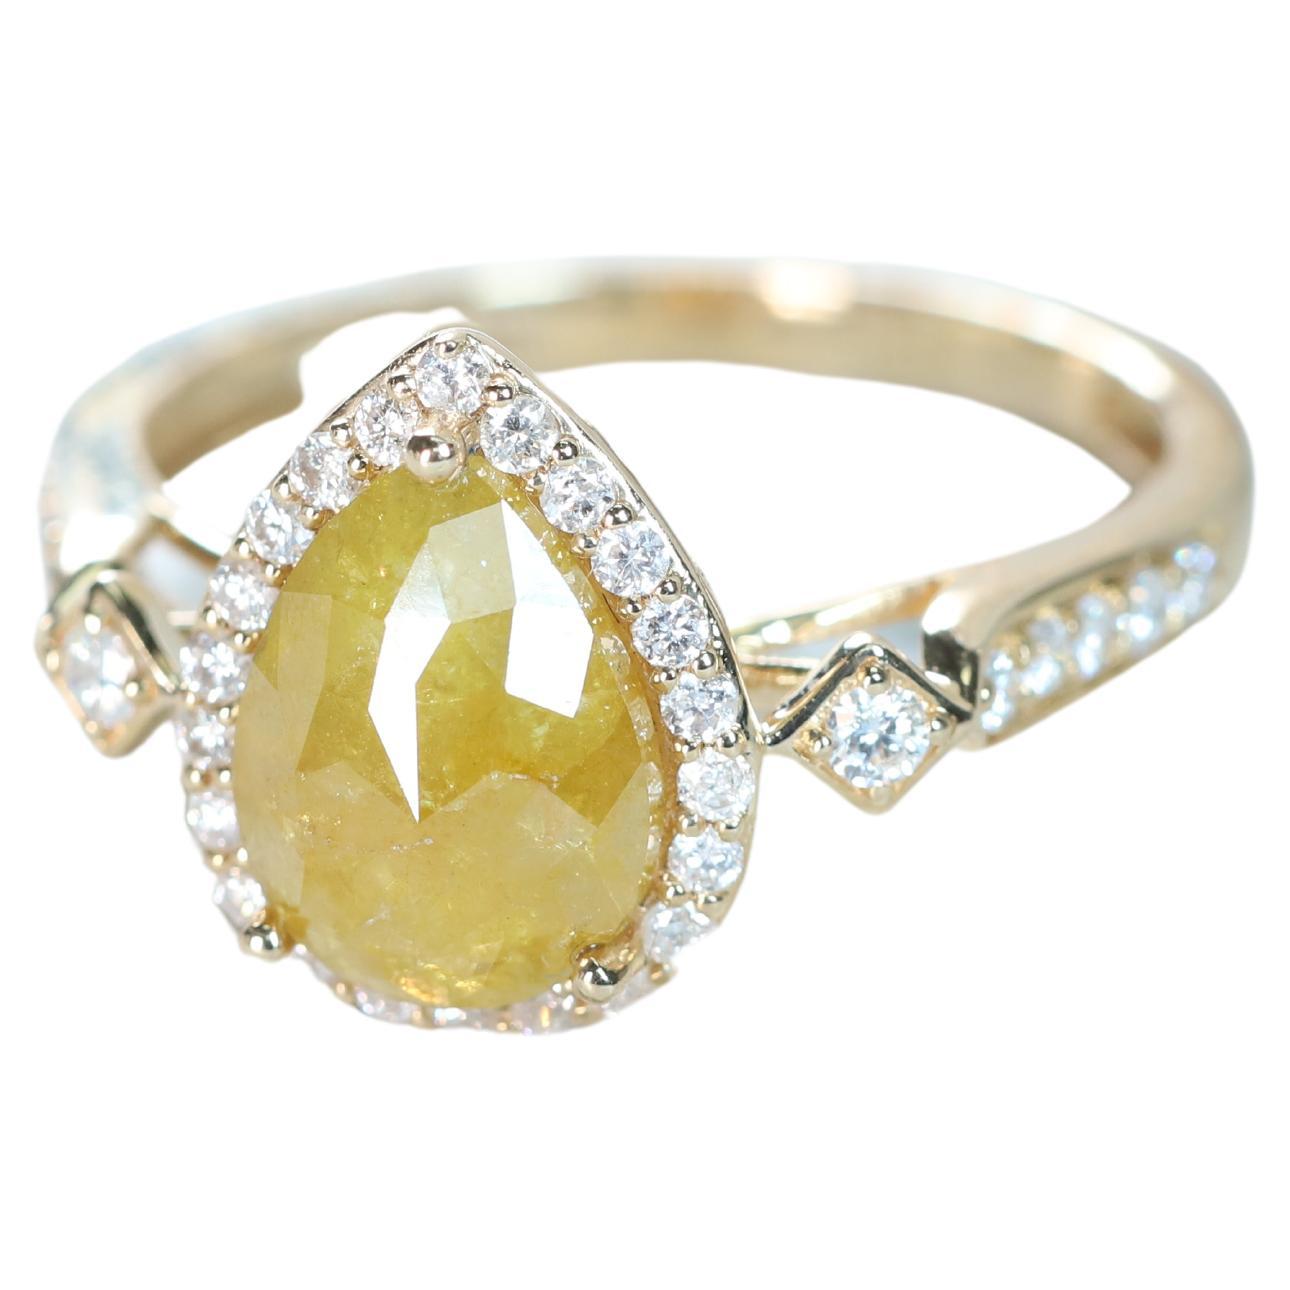 1.84 Carat Brown Diamond With Round-Cut White Diamond 14K Yellow Gold Ring For Sale